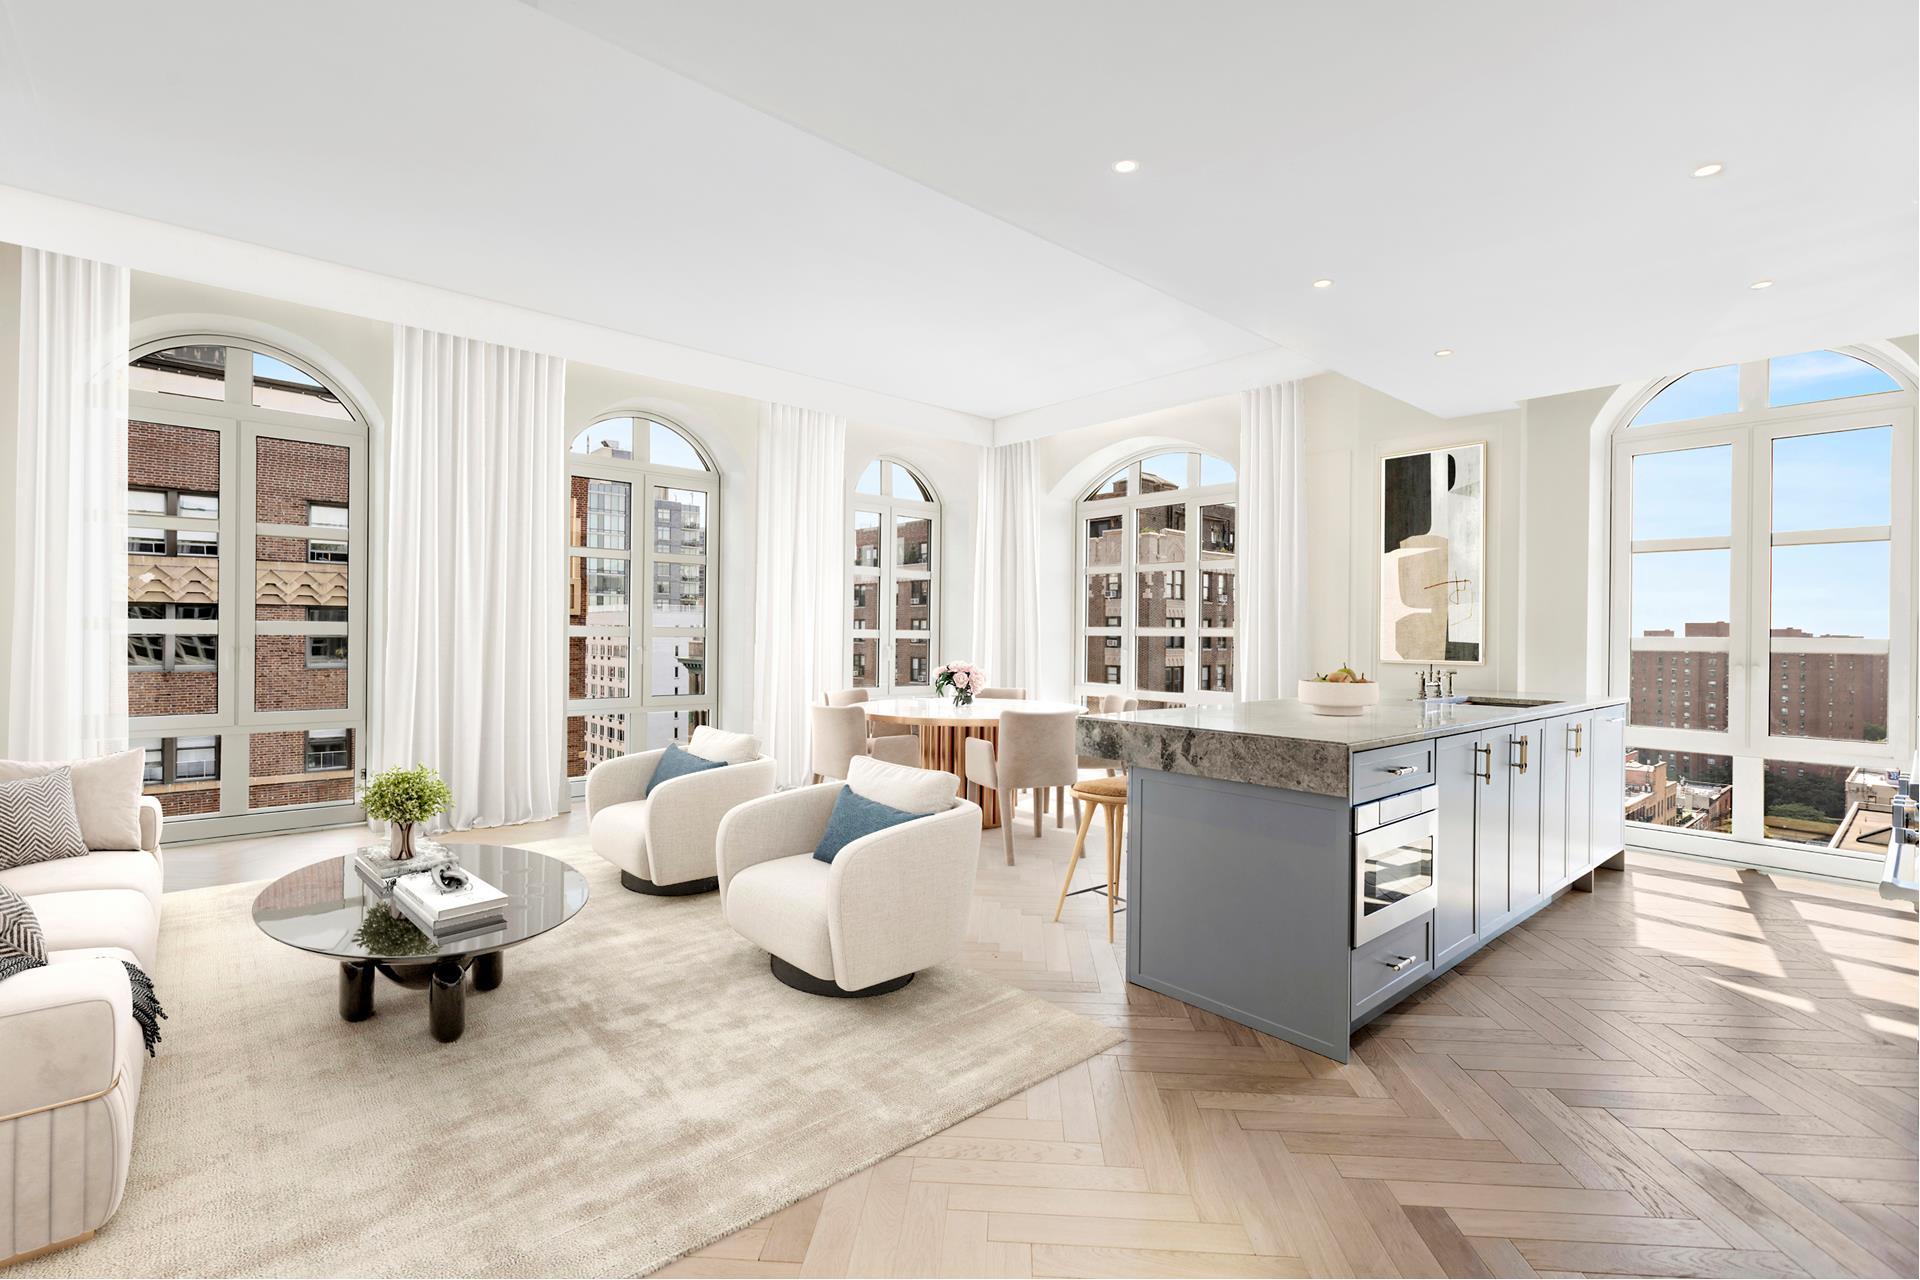 250 East 21st Street Pha, Gramercy Park, Downtown, NYC - 3 Bedrooms  
2.5 Bathrooms  
6 Rooms - 